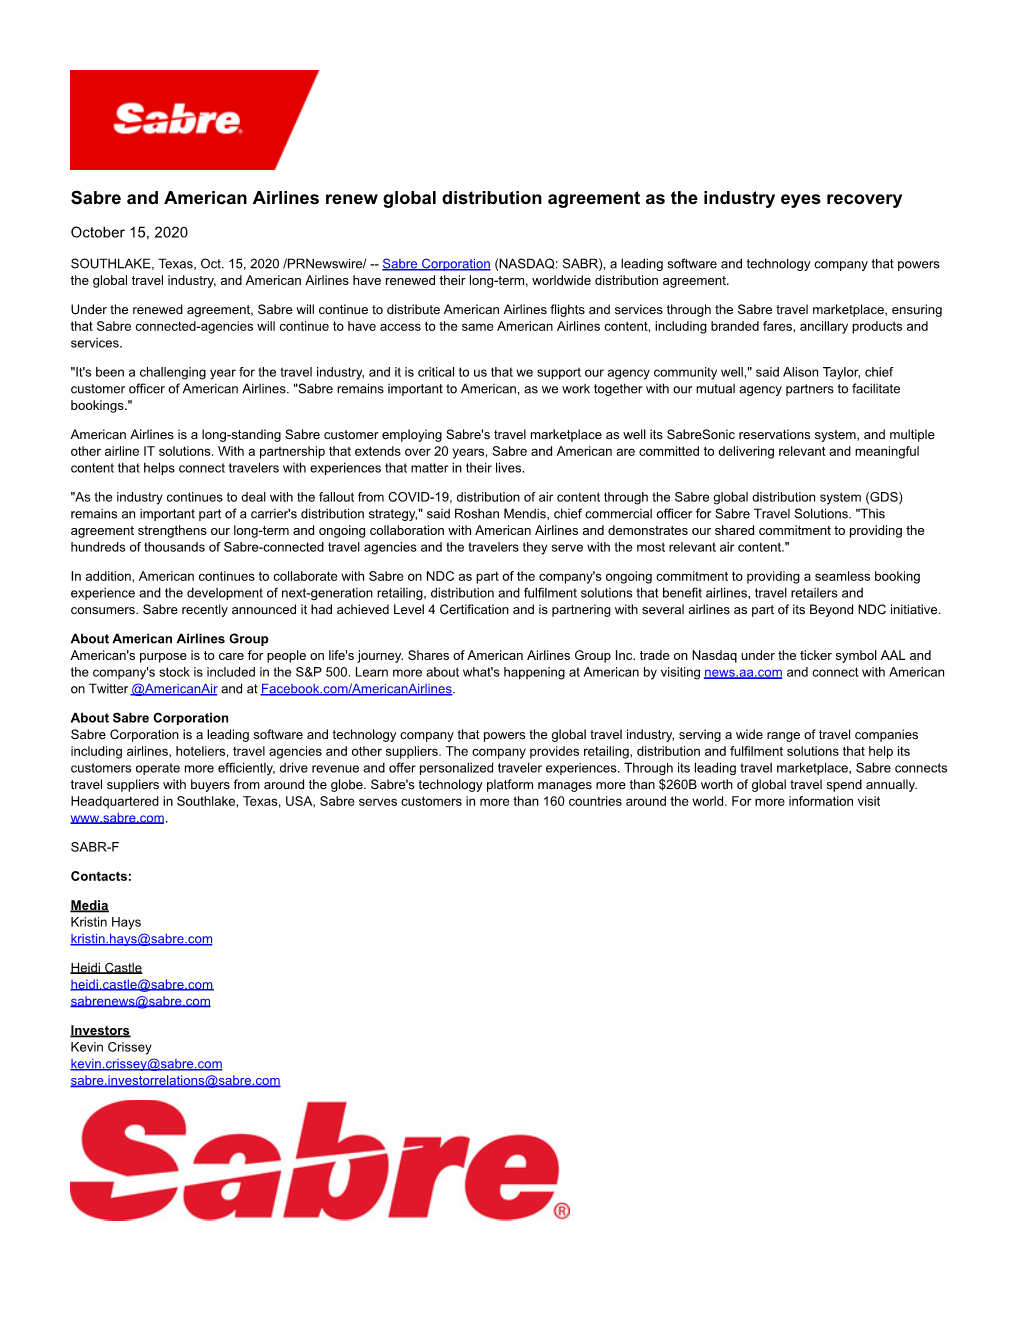 Sabre and American Airlines Renew Global Distribution Agreement As the Industry Eyes Recovery